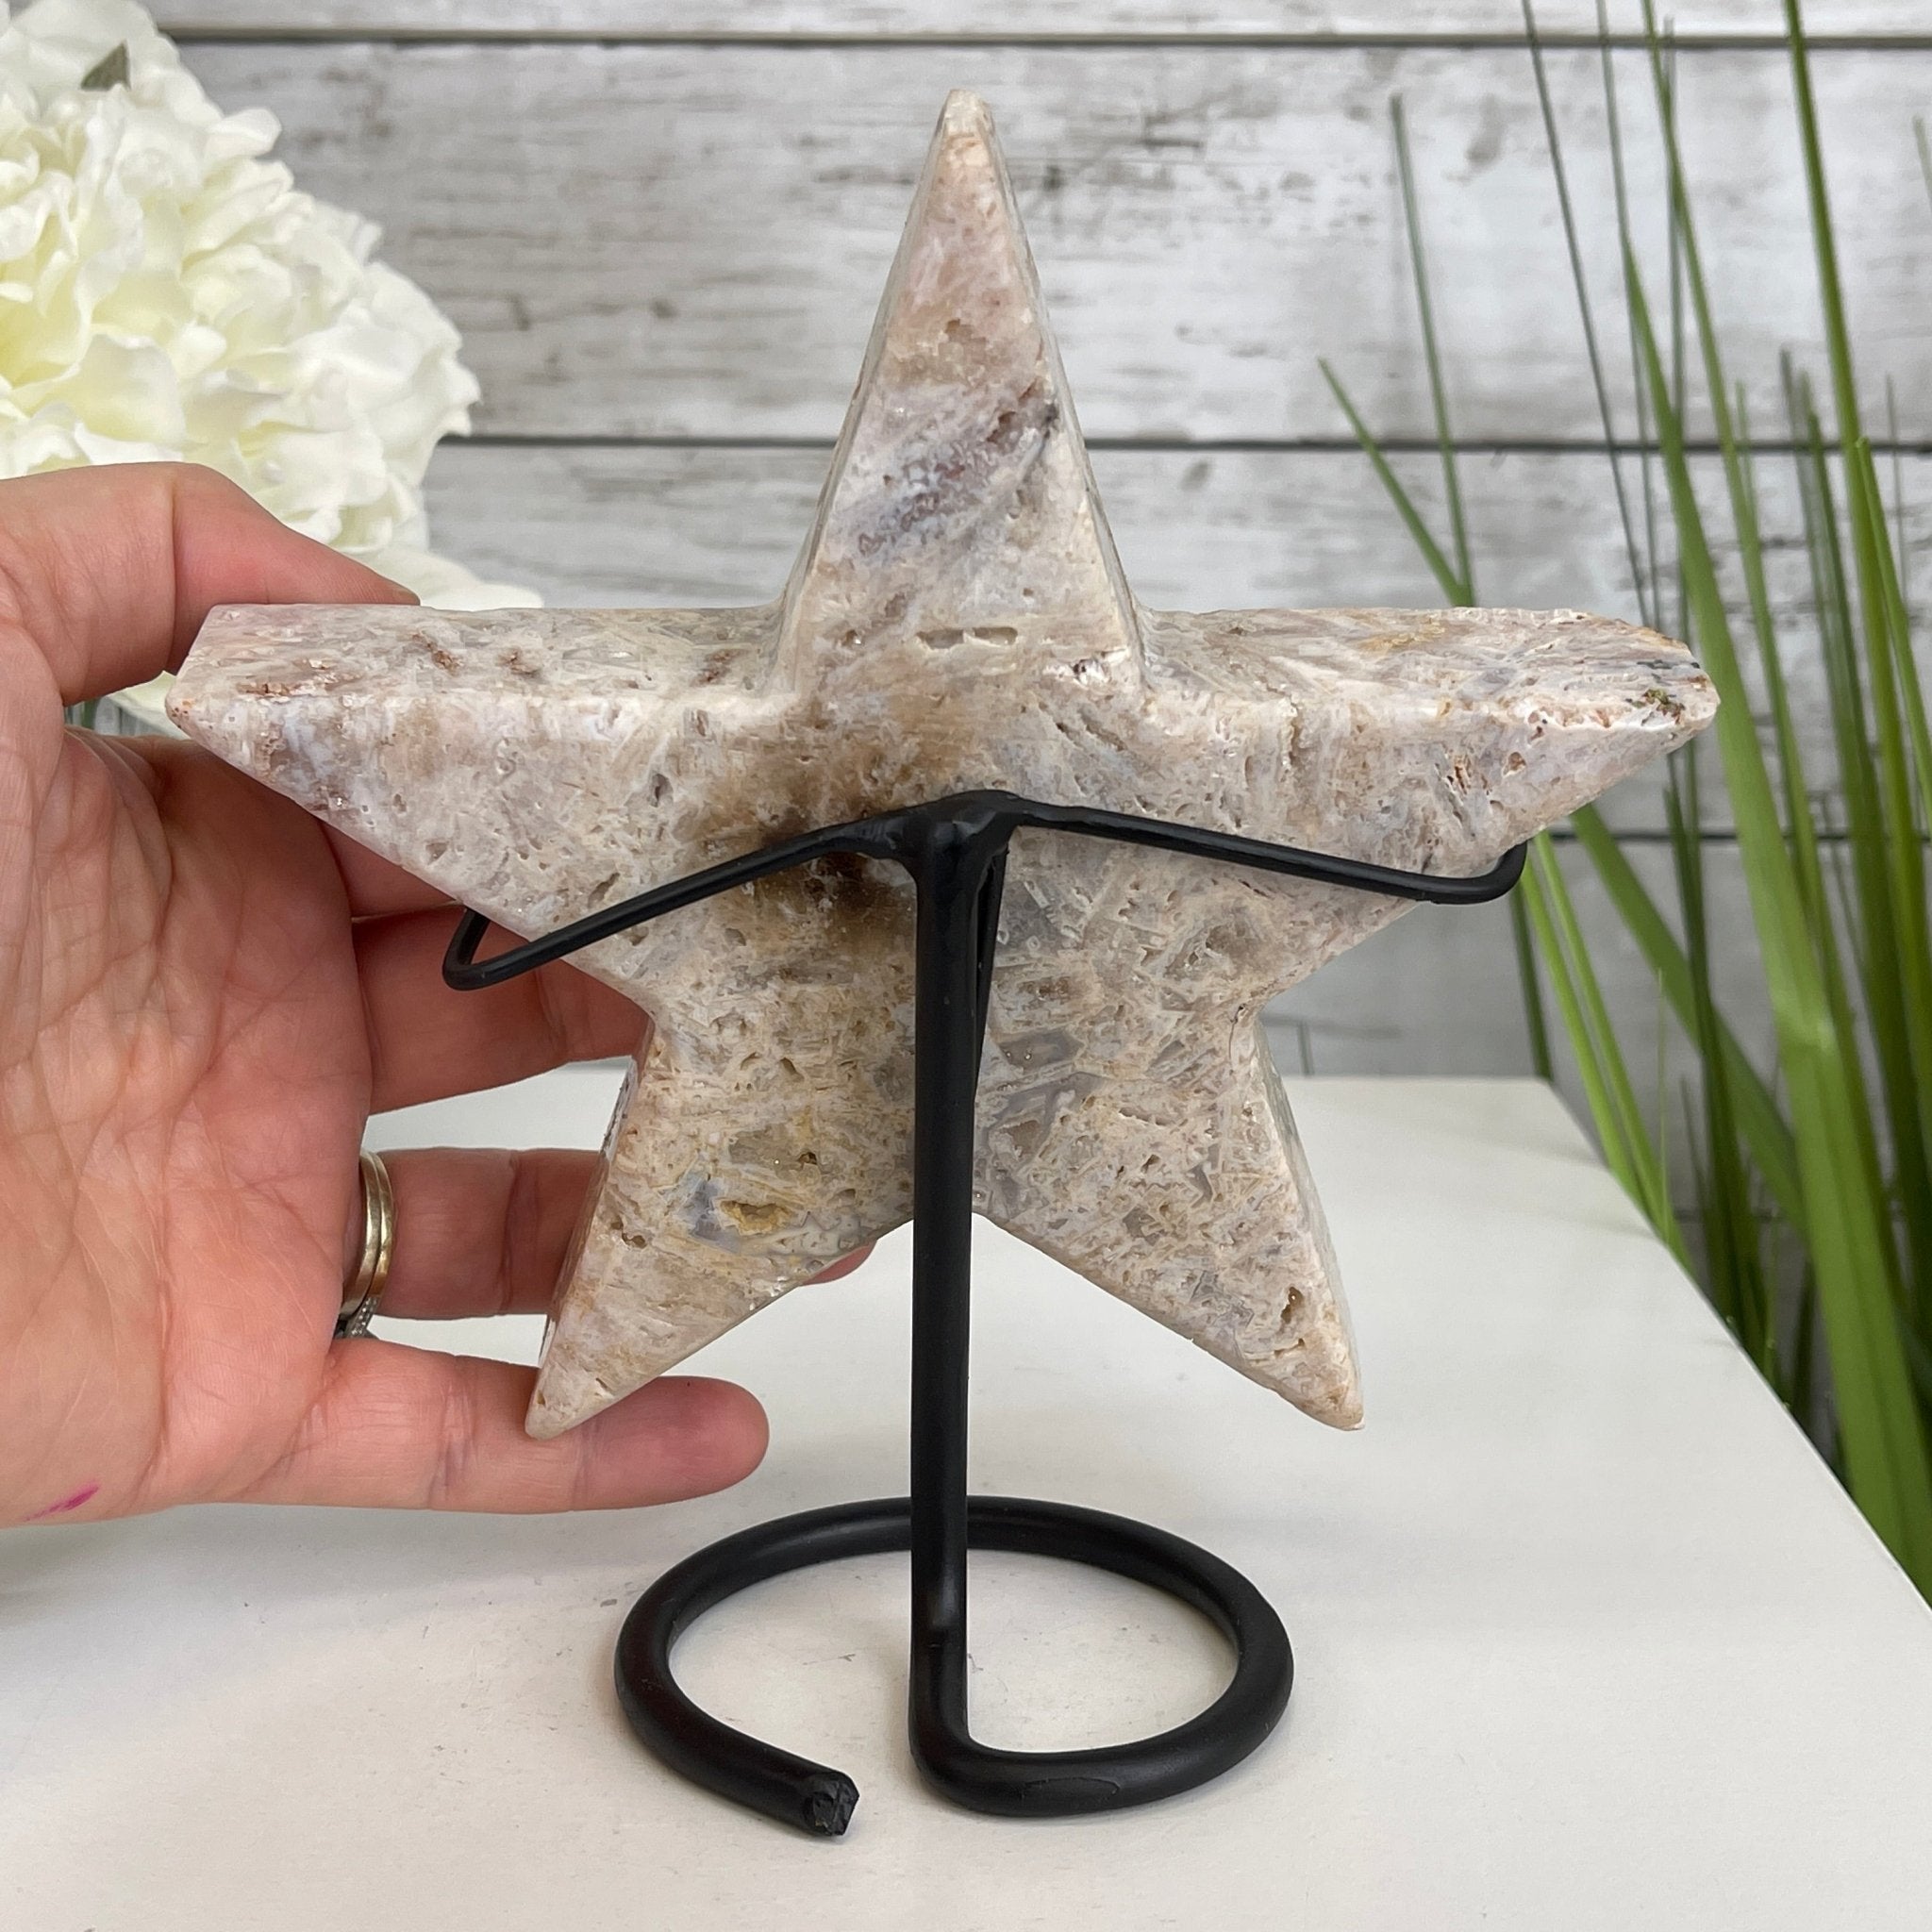 Pink Amethyst Star on a Metal Stand 7" Tall #5746-0007 by Brazil Gems - Brazil GemsBrazil GemsPink Amethyst Star on a Metal Stand 7" Tall #5746-0007 by Brazil GemsStars5746-0007